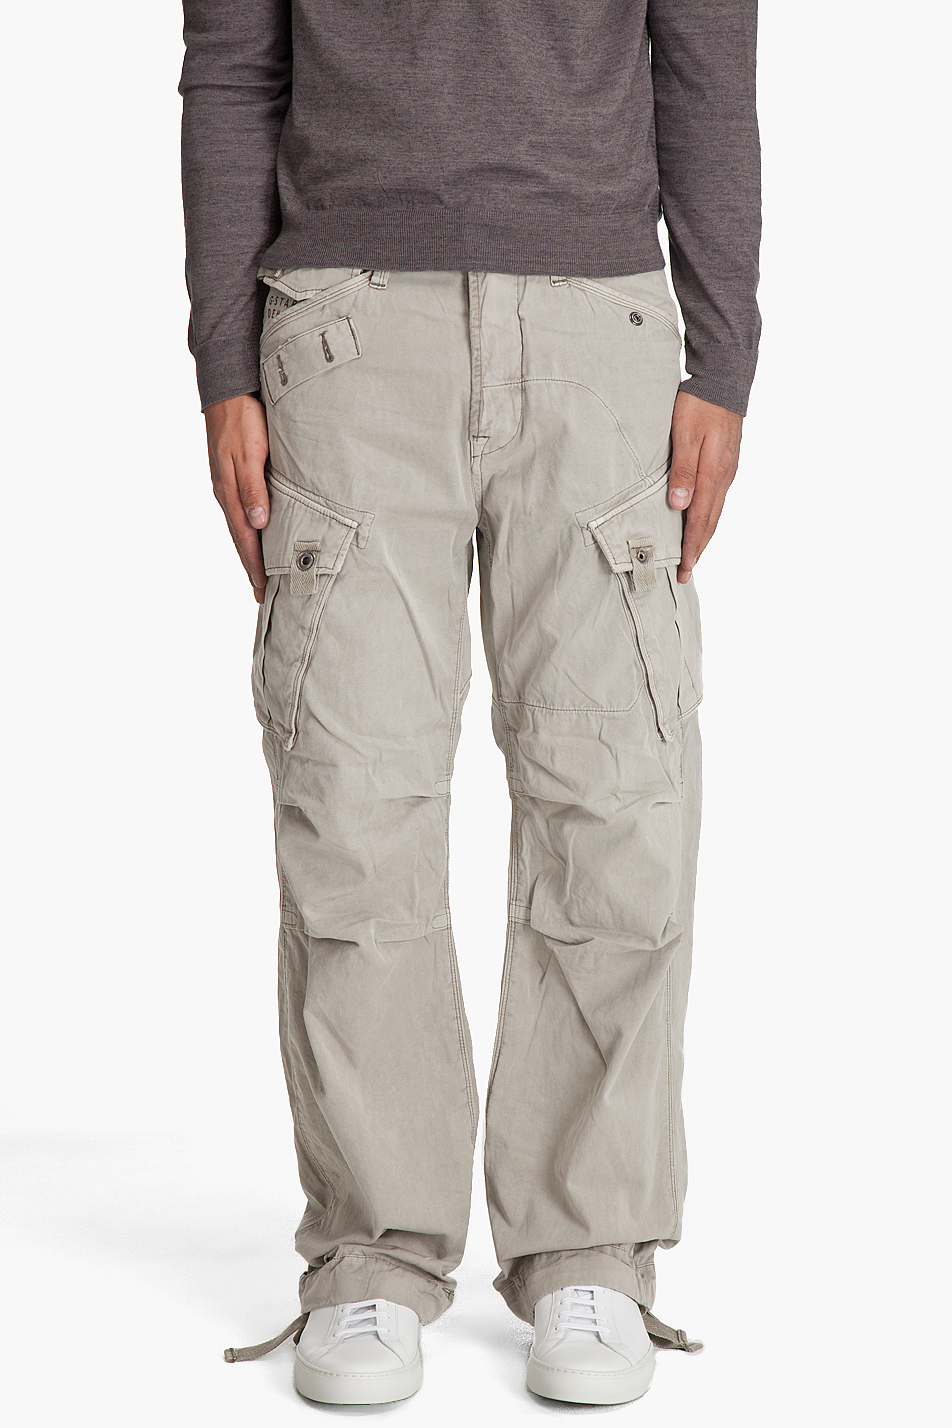 Lyst - G-Star Raw Rovic Loose Cargo Pants in White for Men